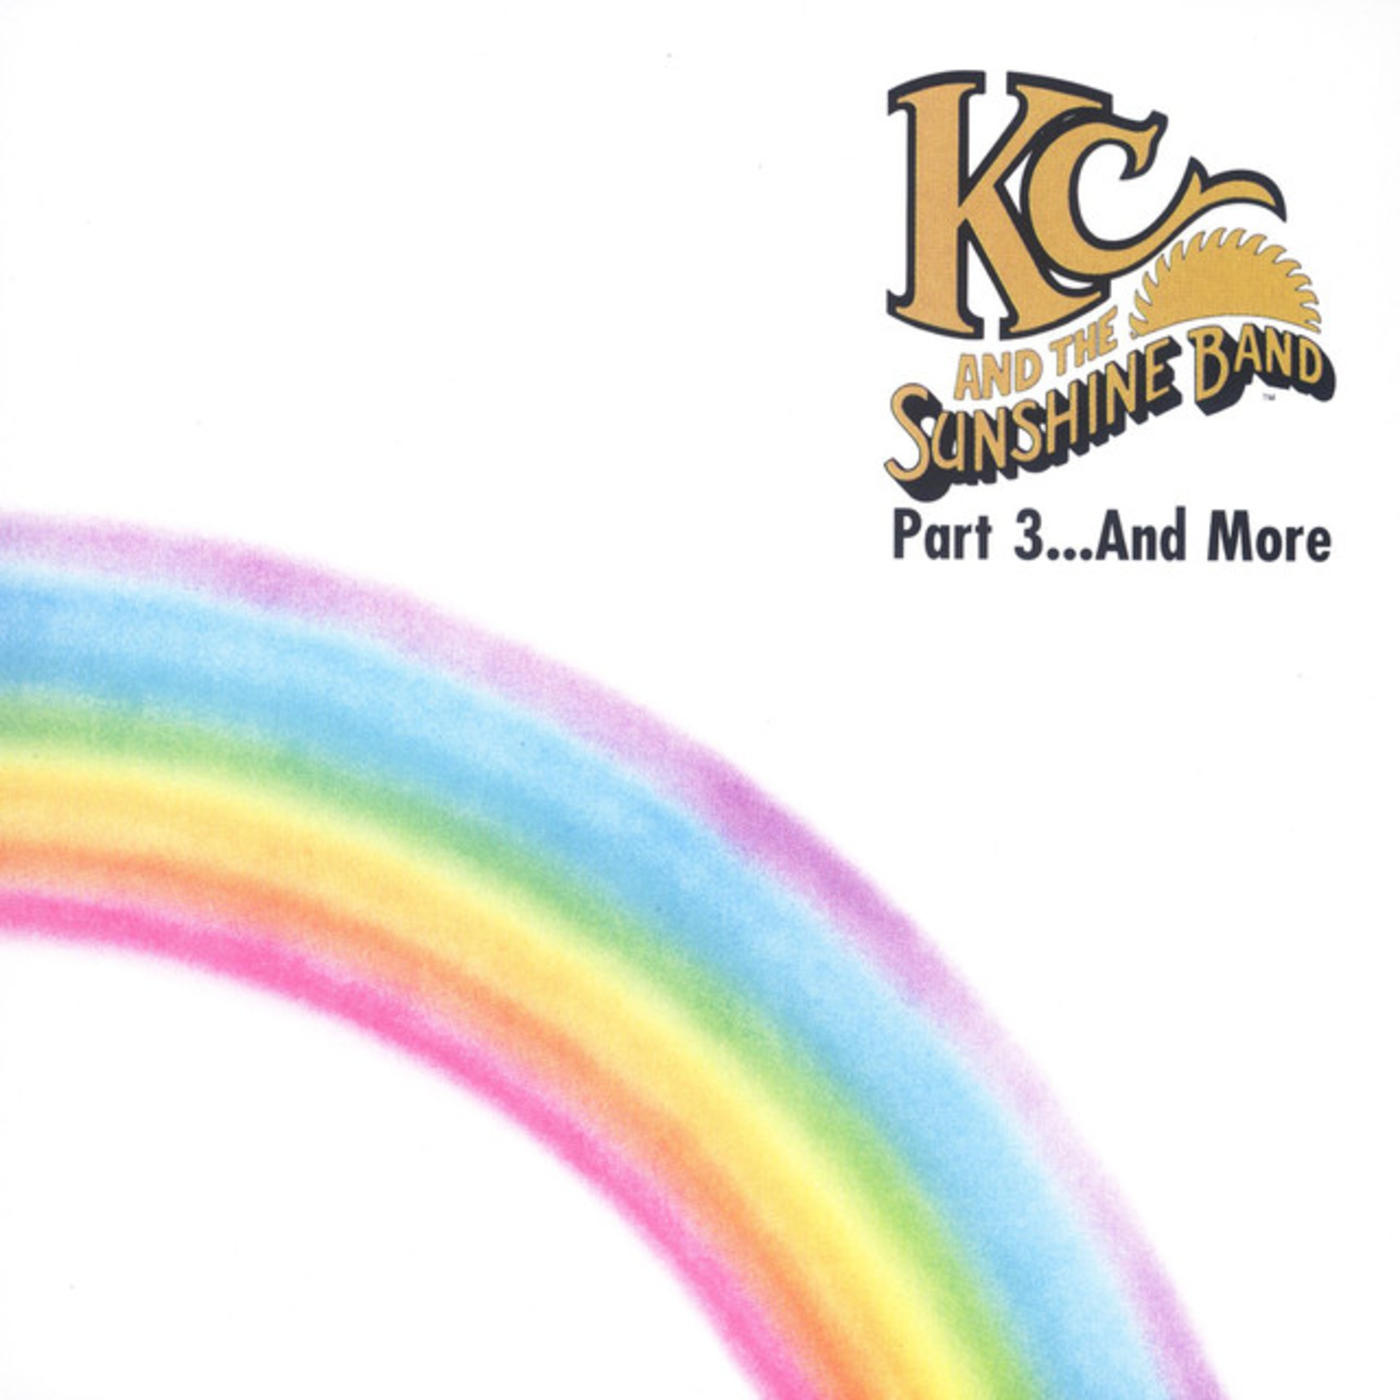 KC & The Sunshine Band - Part 3...And More